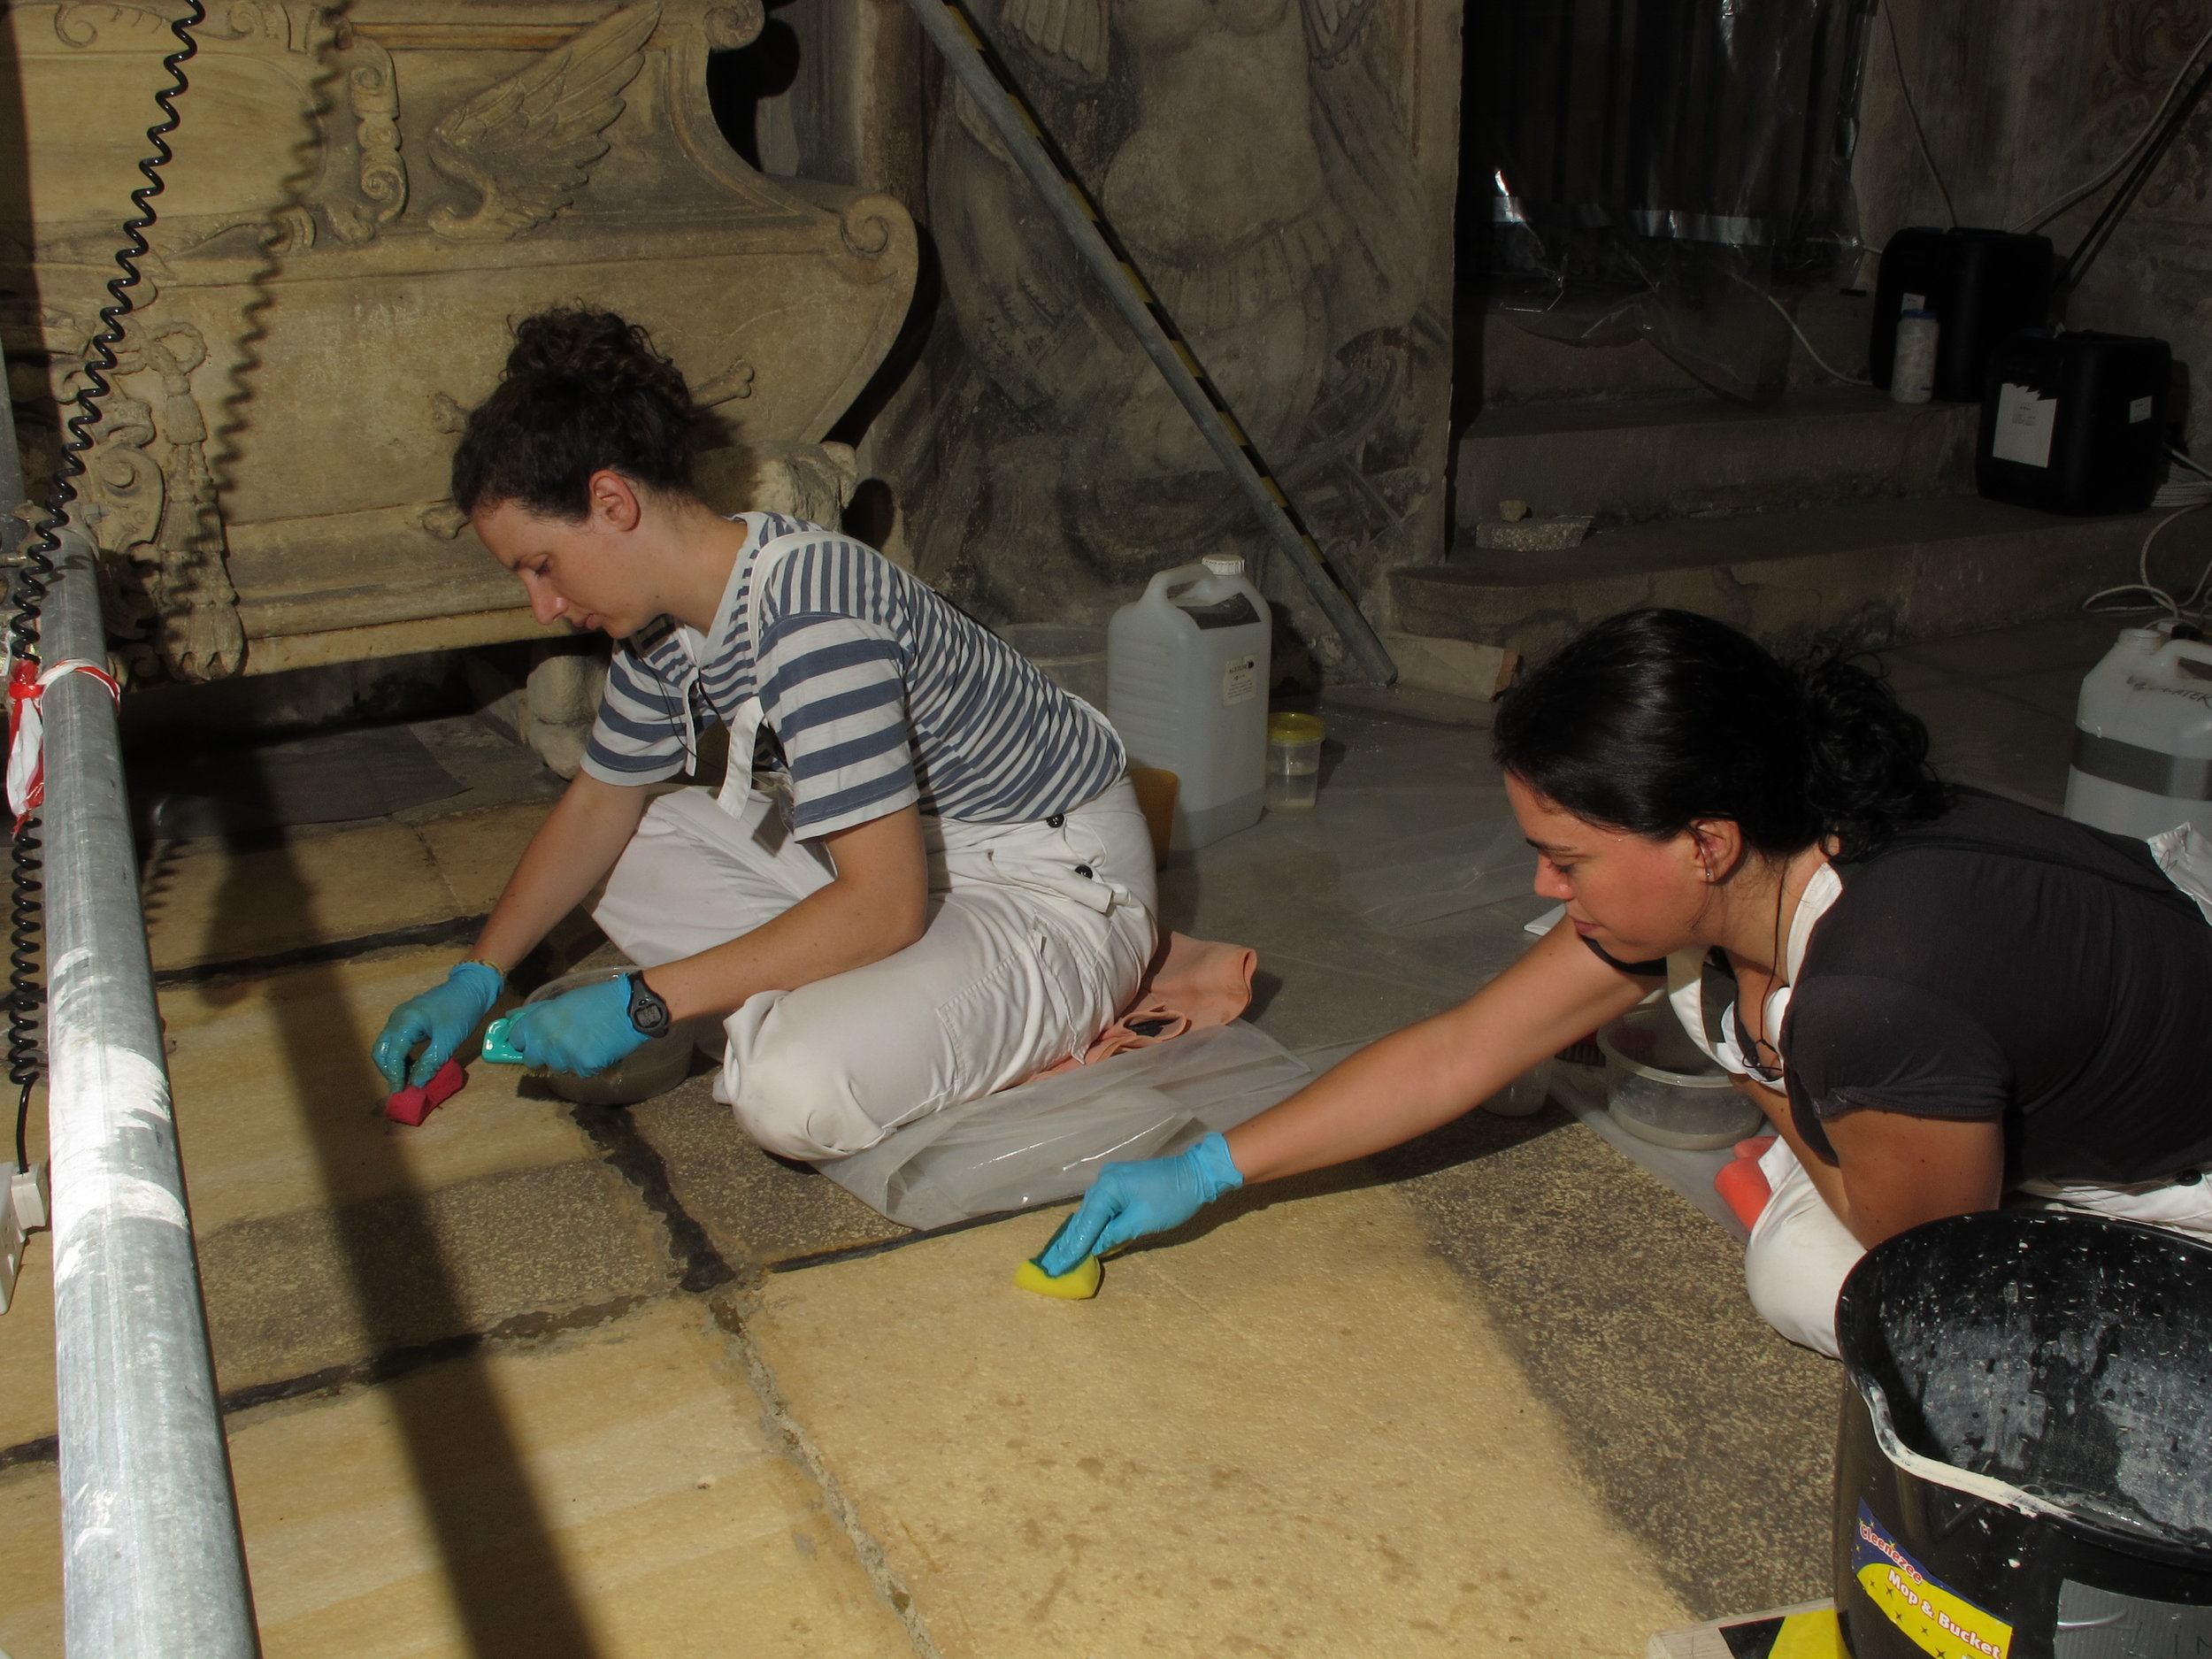  A thick layer of dirt and microbiological growth was cleaned from the stone floor of the Crypt.  Image © Courtauld CWPD 